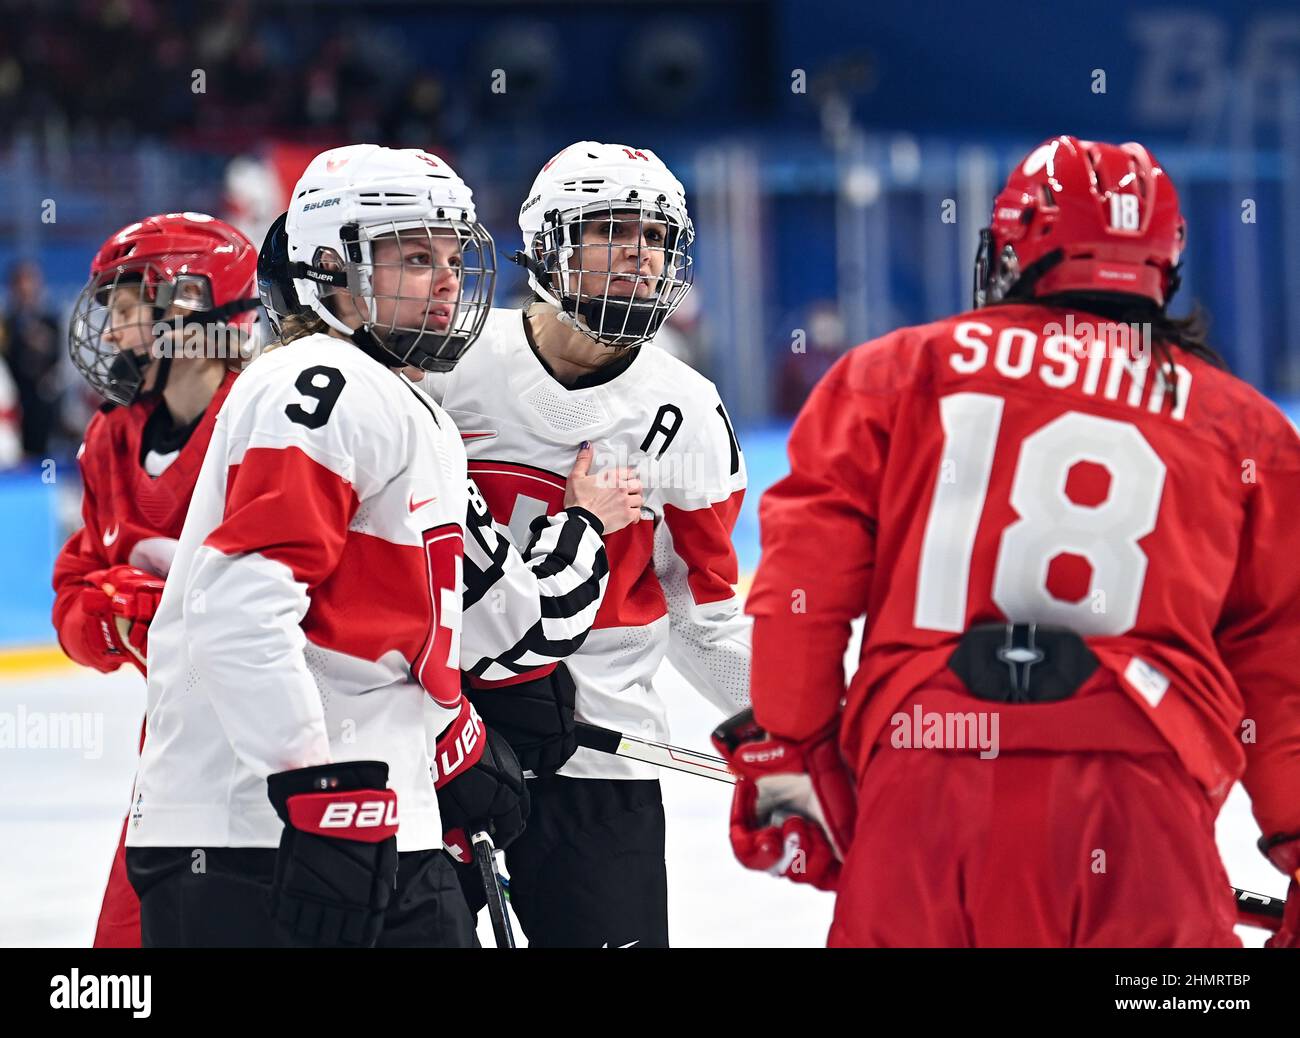 Beijing, China. 12th Feb, 2022. Evelina Raselli (3rd L) of Switzerland argues with Olga Sosina (1st R) of ROC during the ice hockey women's quarterfinals between Switzerland and ROC at Wukesong Sports Centre in Beijing, capital of China, Feb. 12, 2022. Credit: Song Yanhua/Xinhua/Alamy Live News Stock Photo